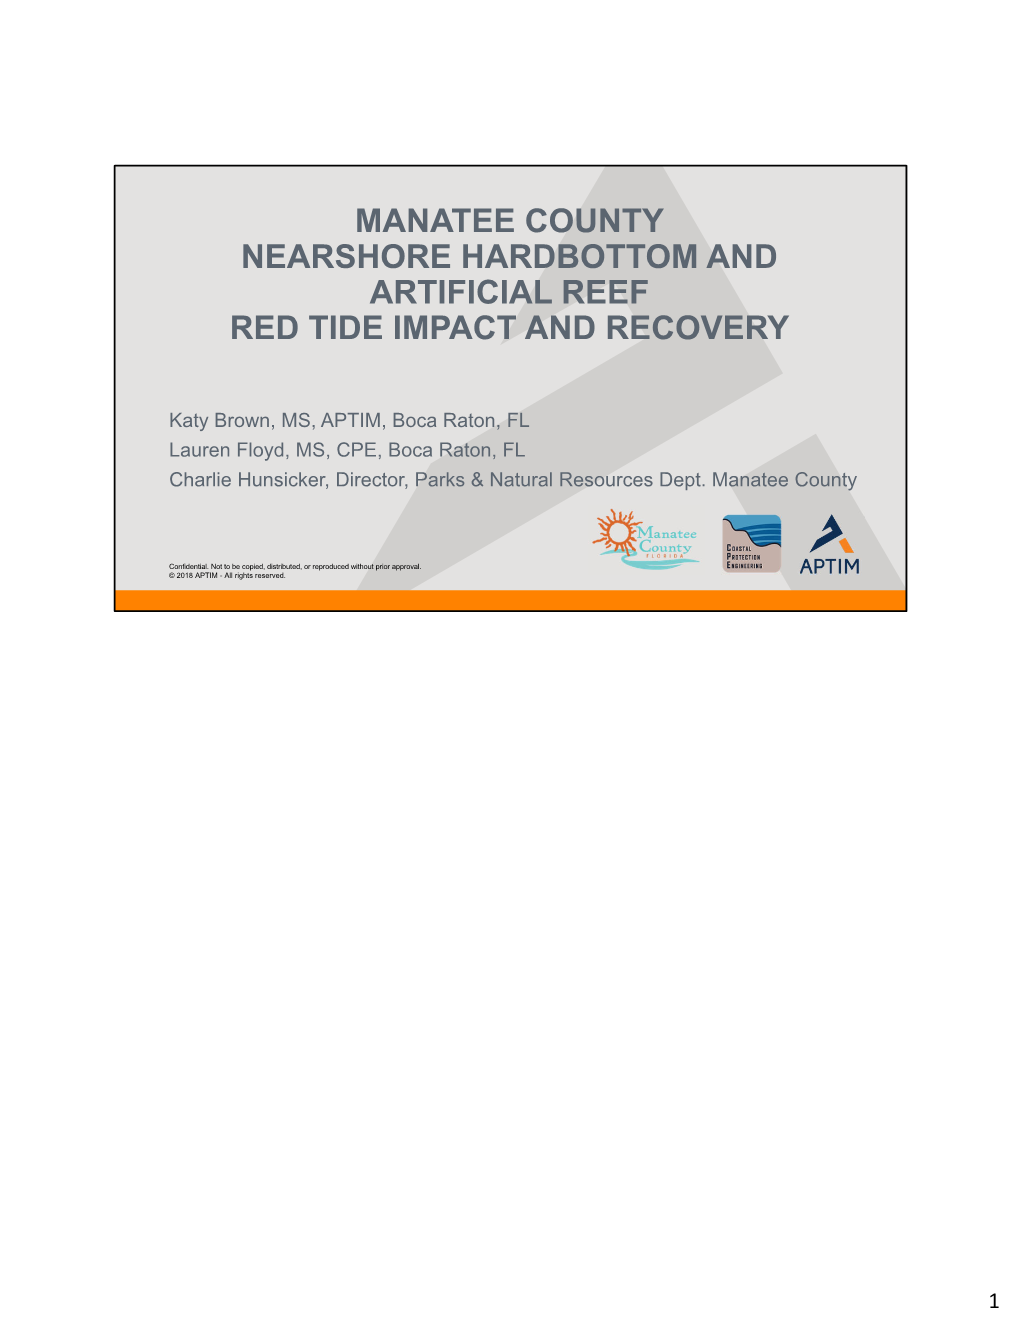 Manatee County, Nearshore Hardbottom and Artificial Reef Red